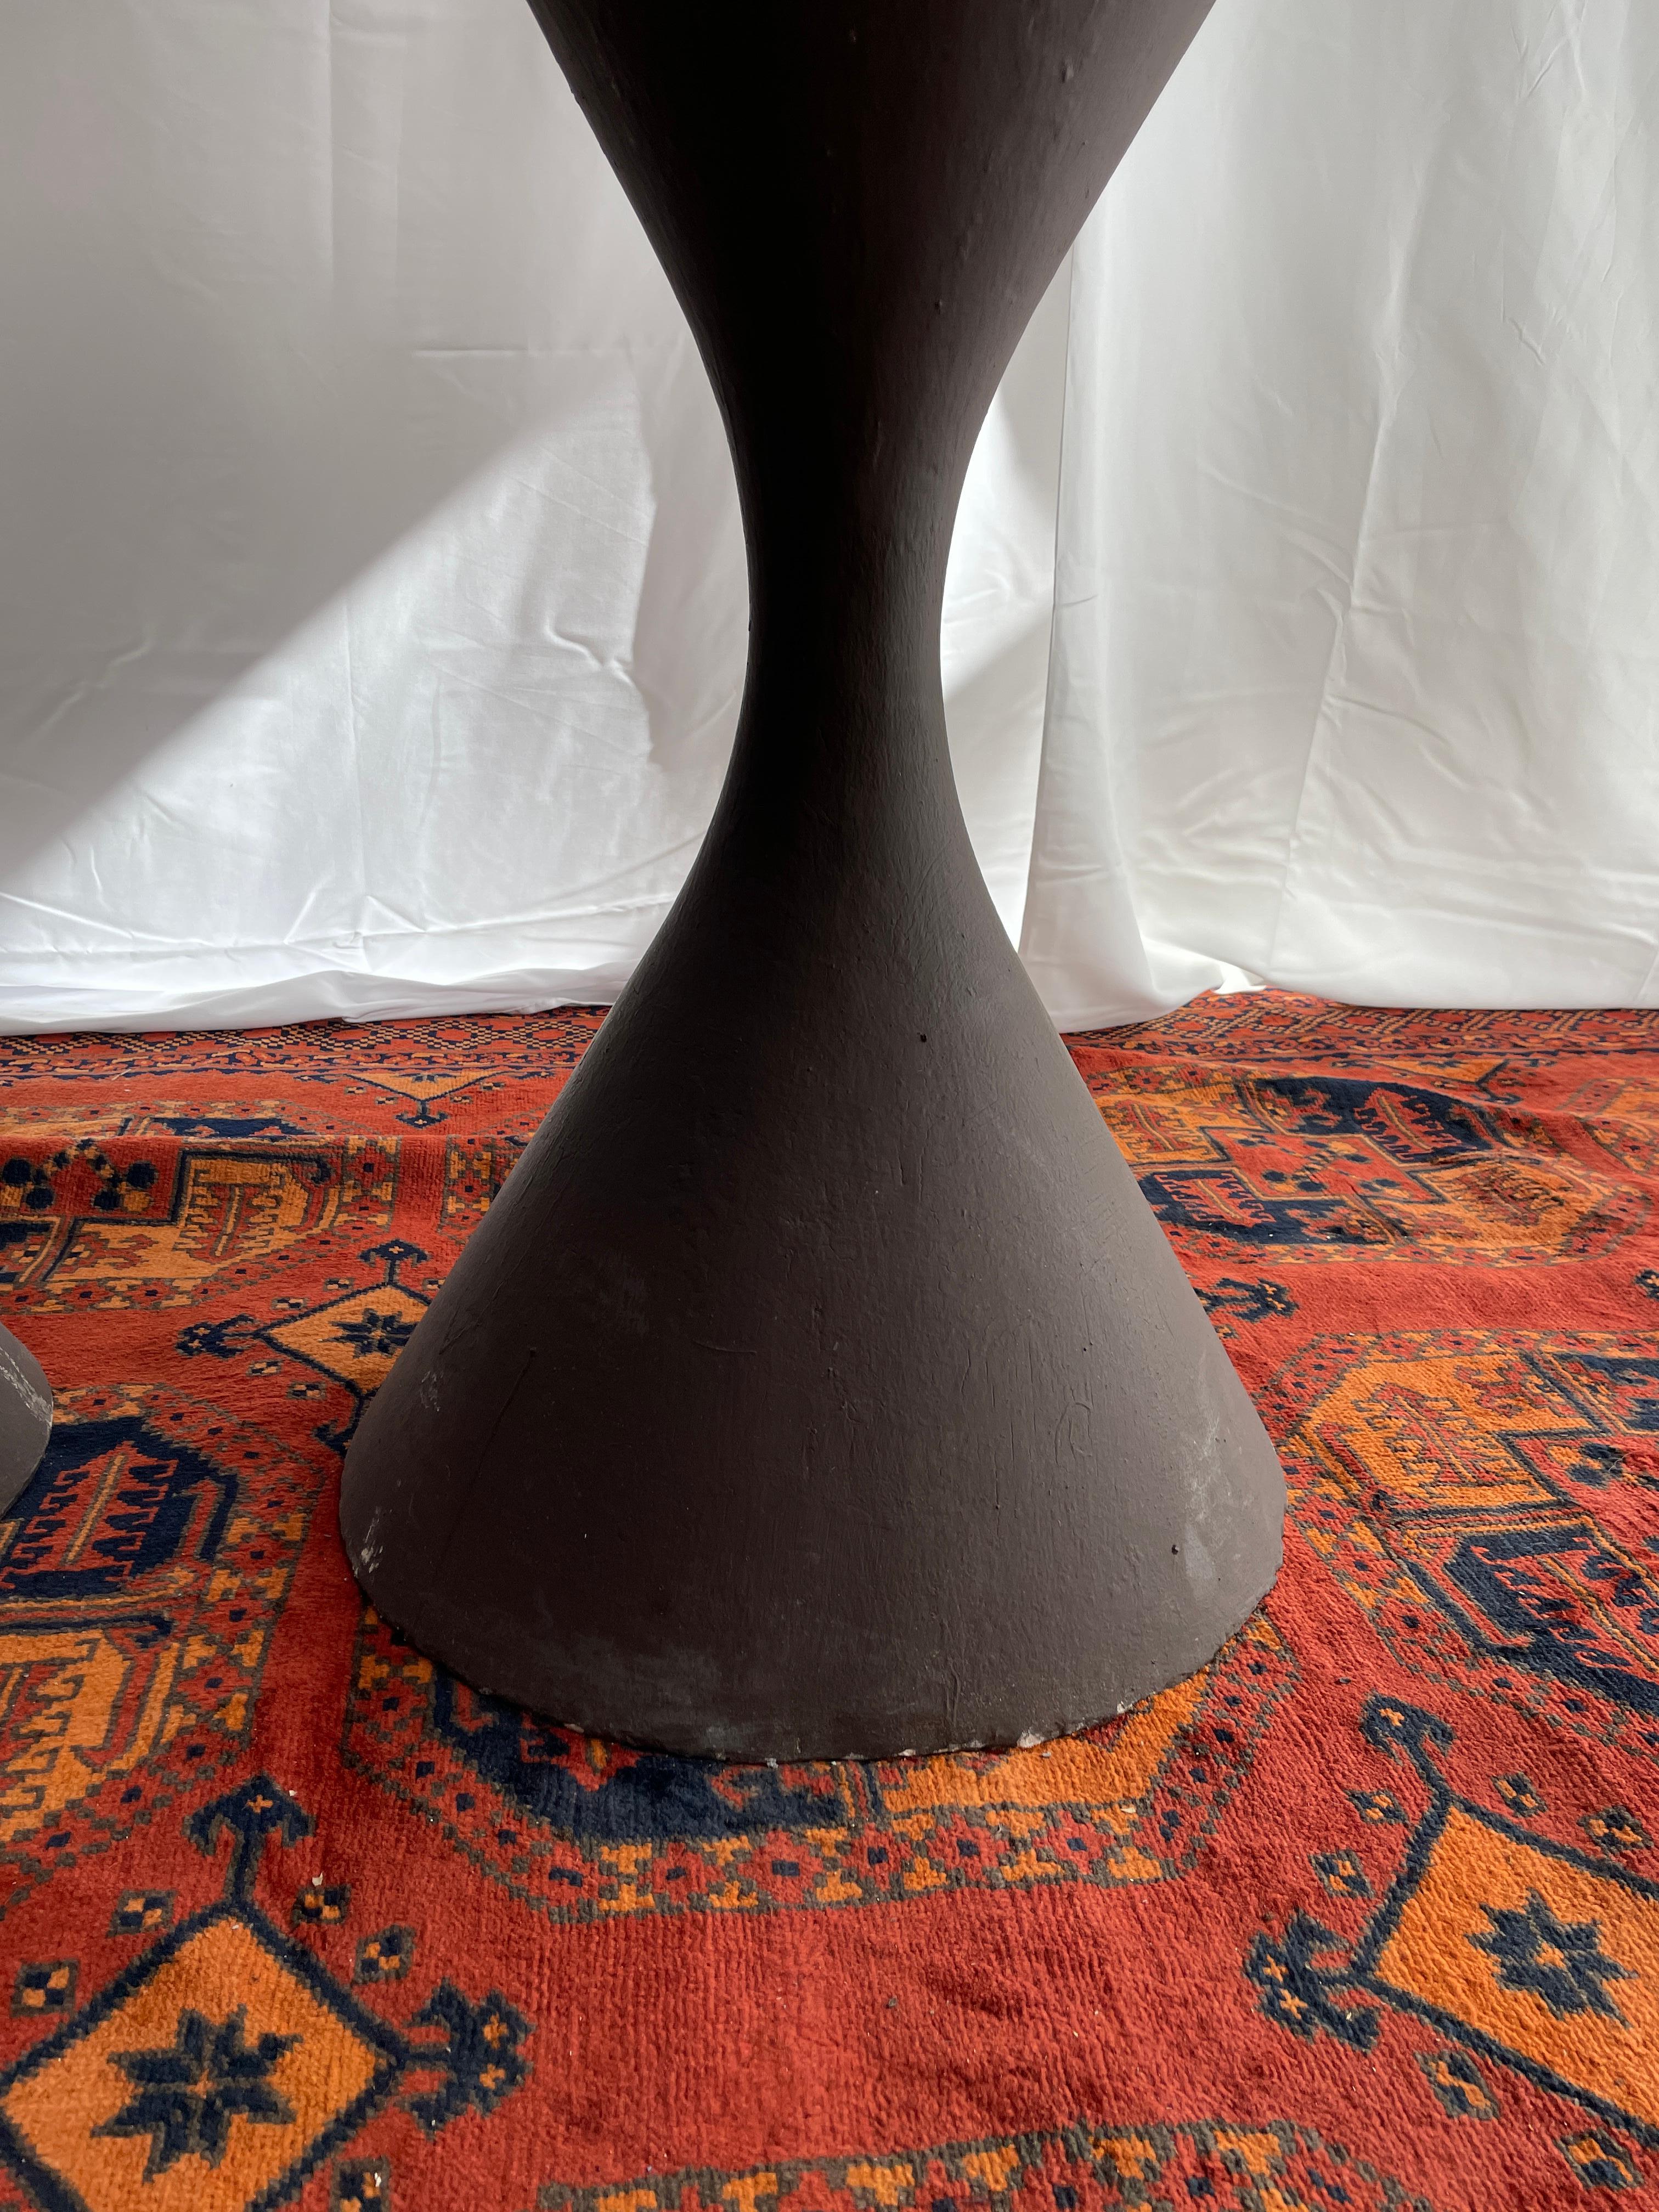 Pair of French Brown Diabolo Planter by Willy Guhl and Anton Bee for Eternit For Sale 3